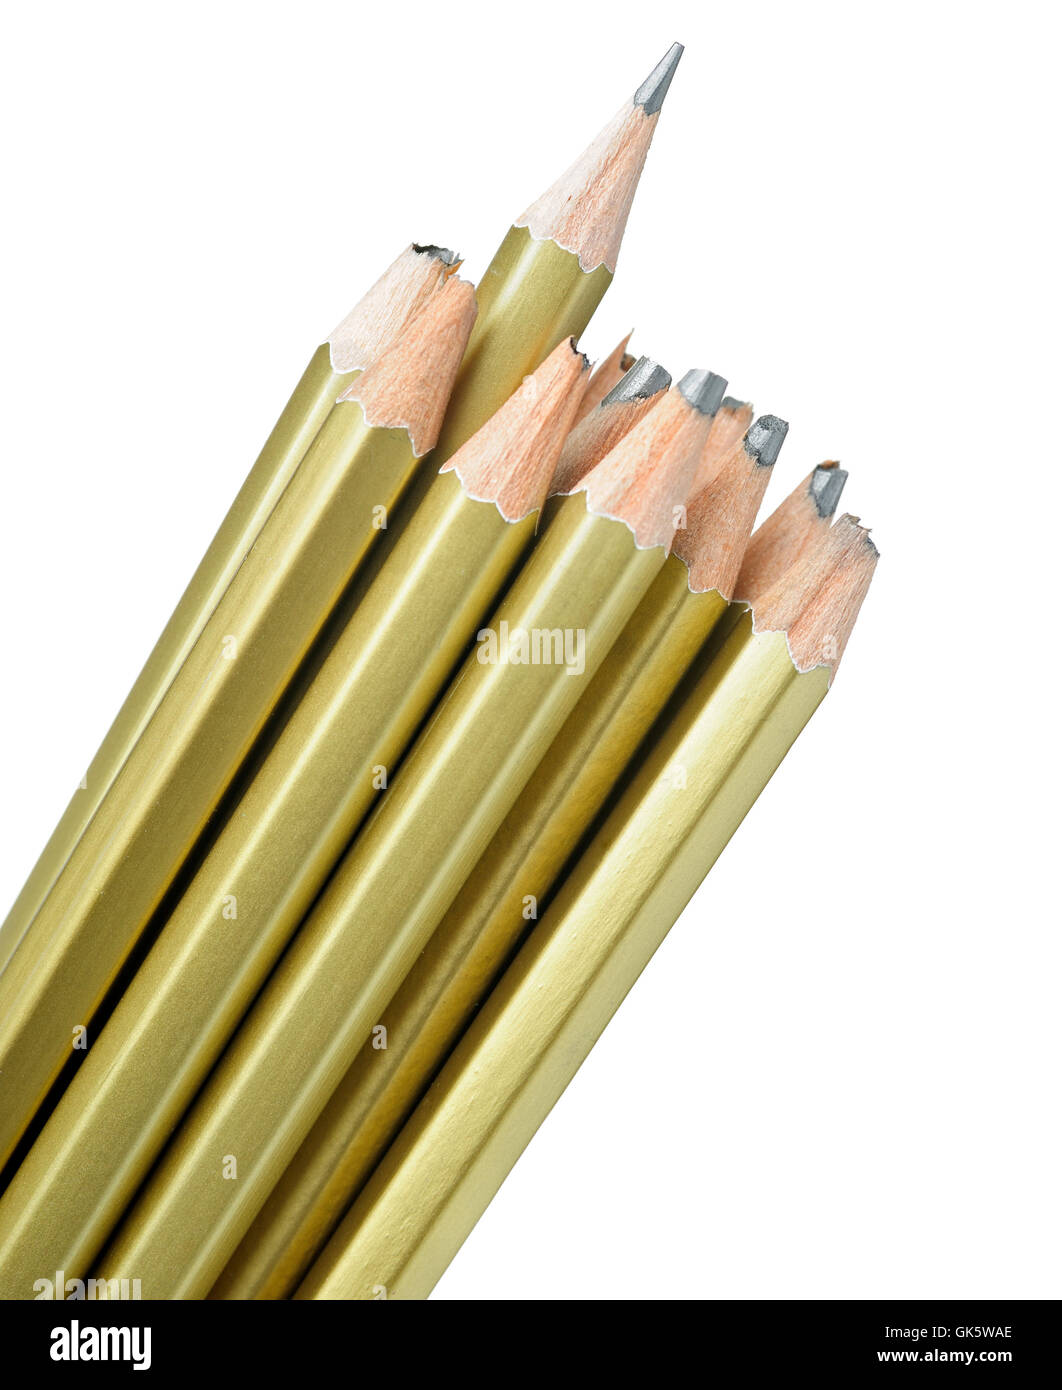 whole and broken pencils Stock Photo